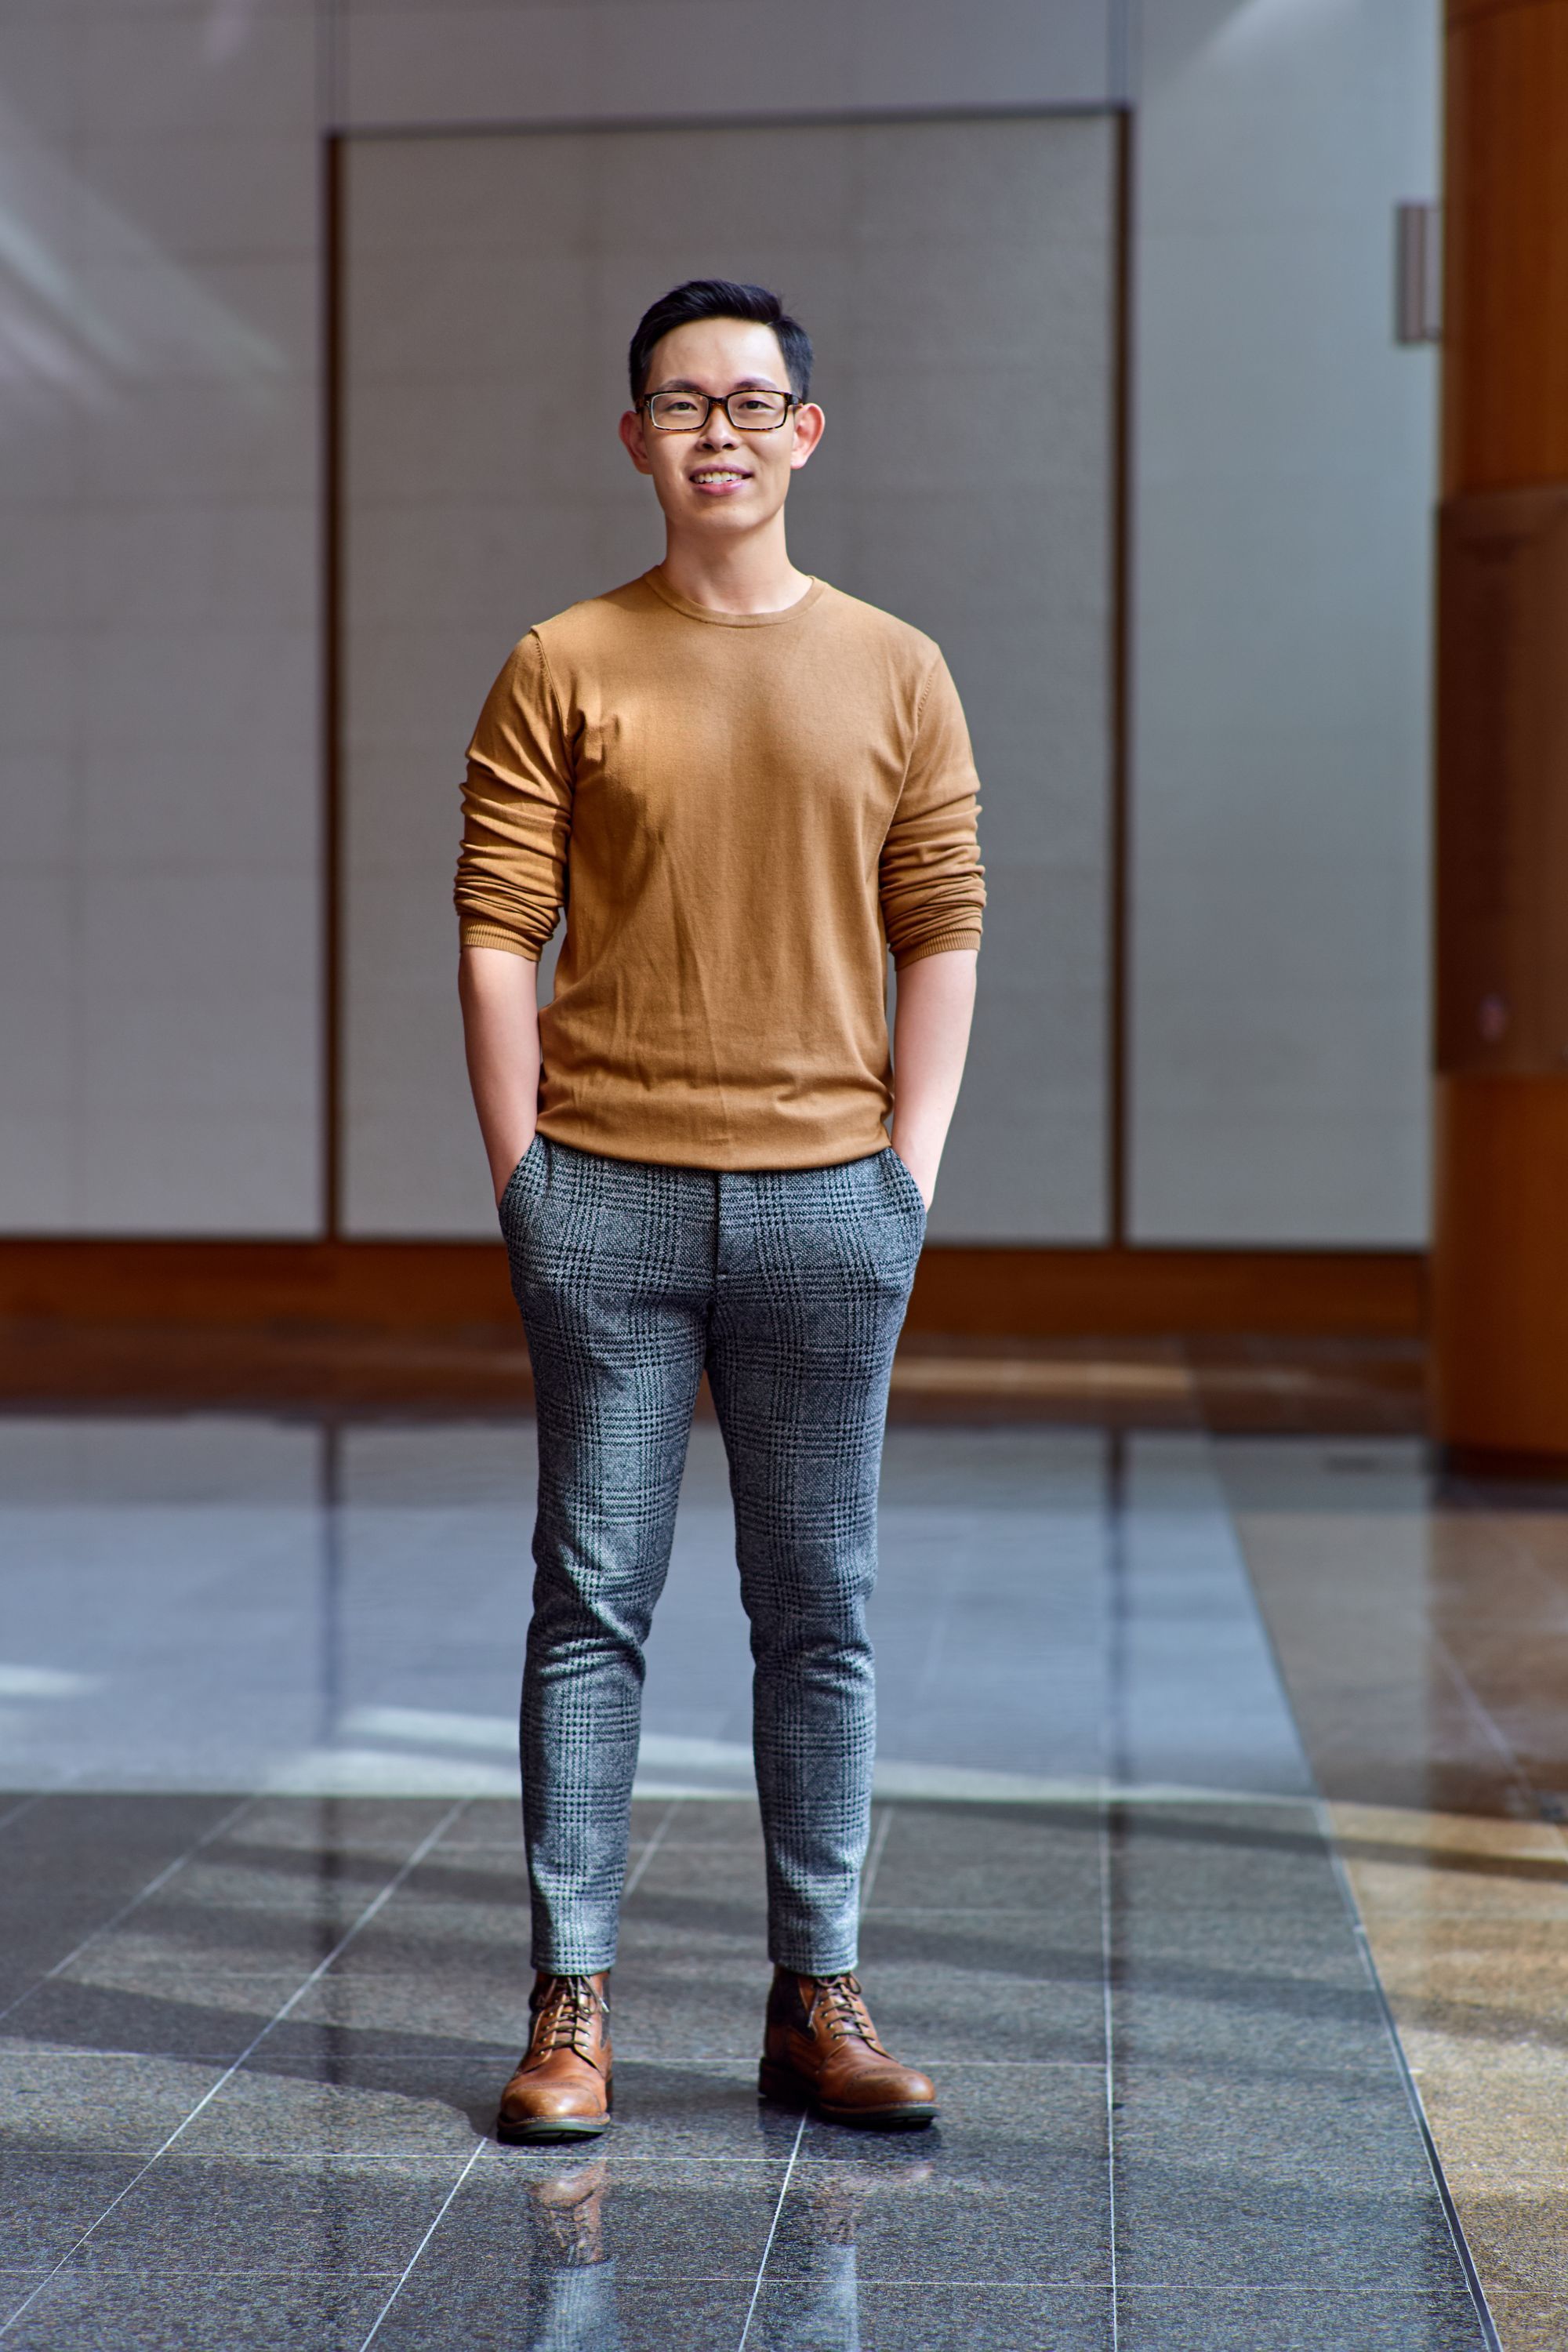 Getting to know our editorial team: Andy Tay